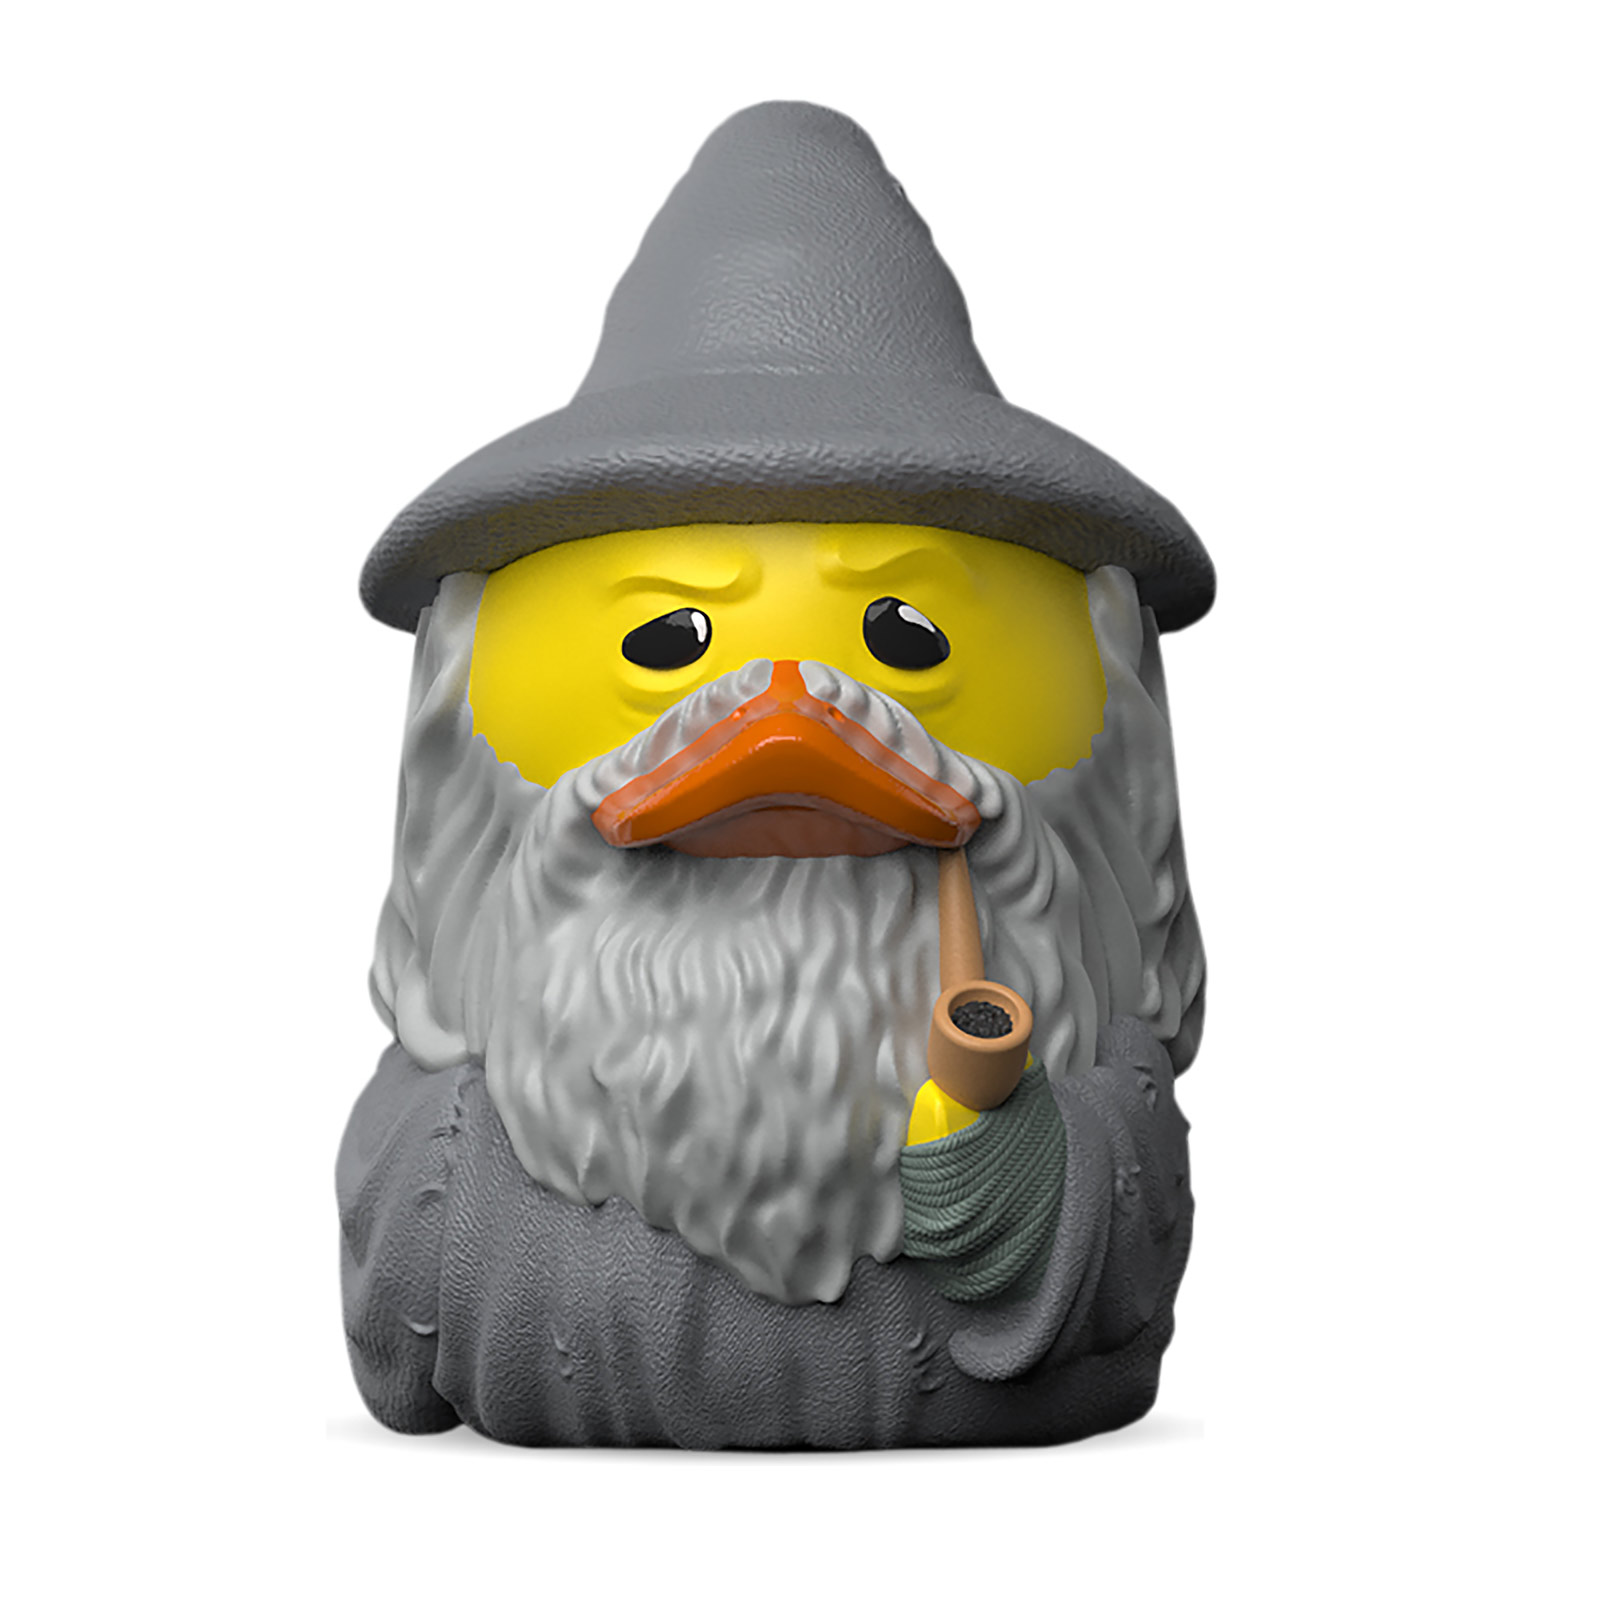 Lord of the Rings - Gandalf the Grey TUBBZ Decorative Duck